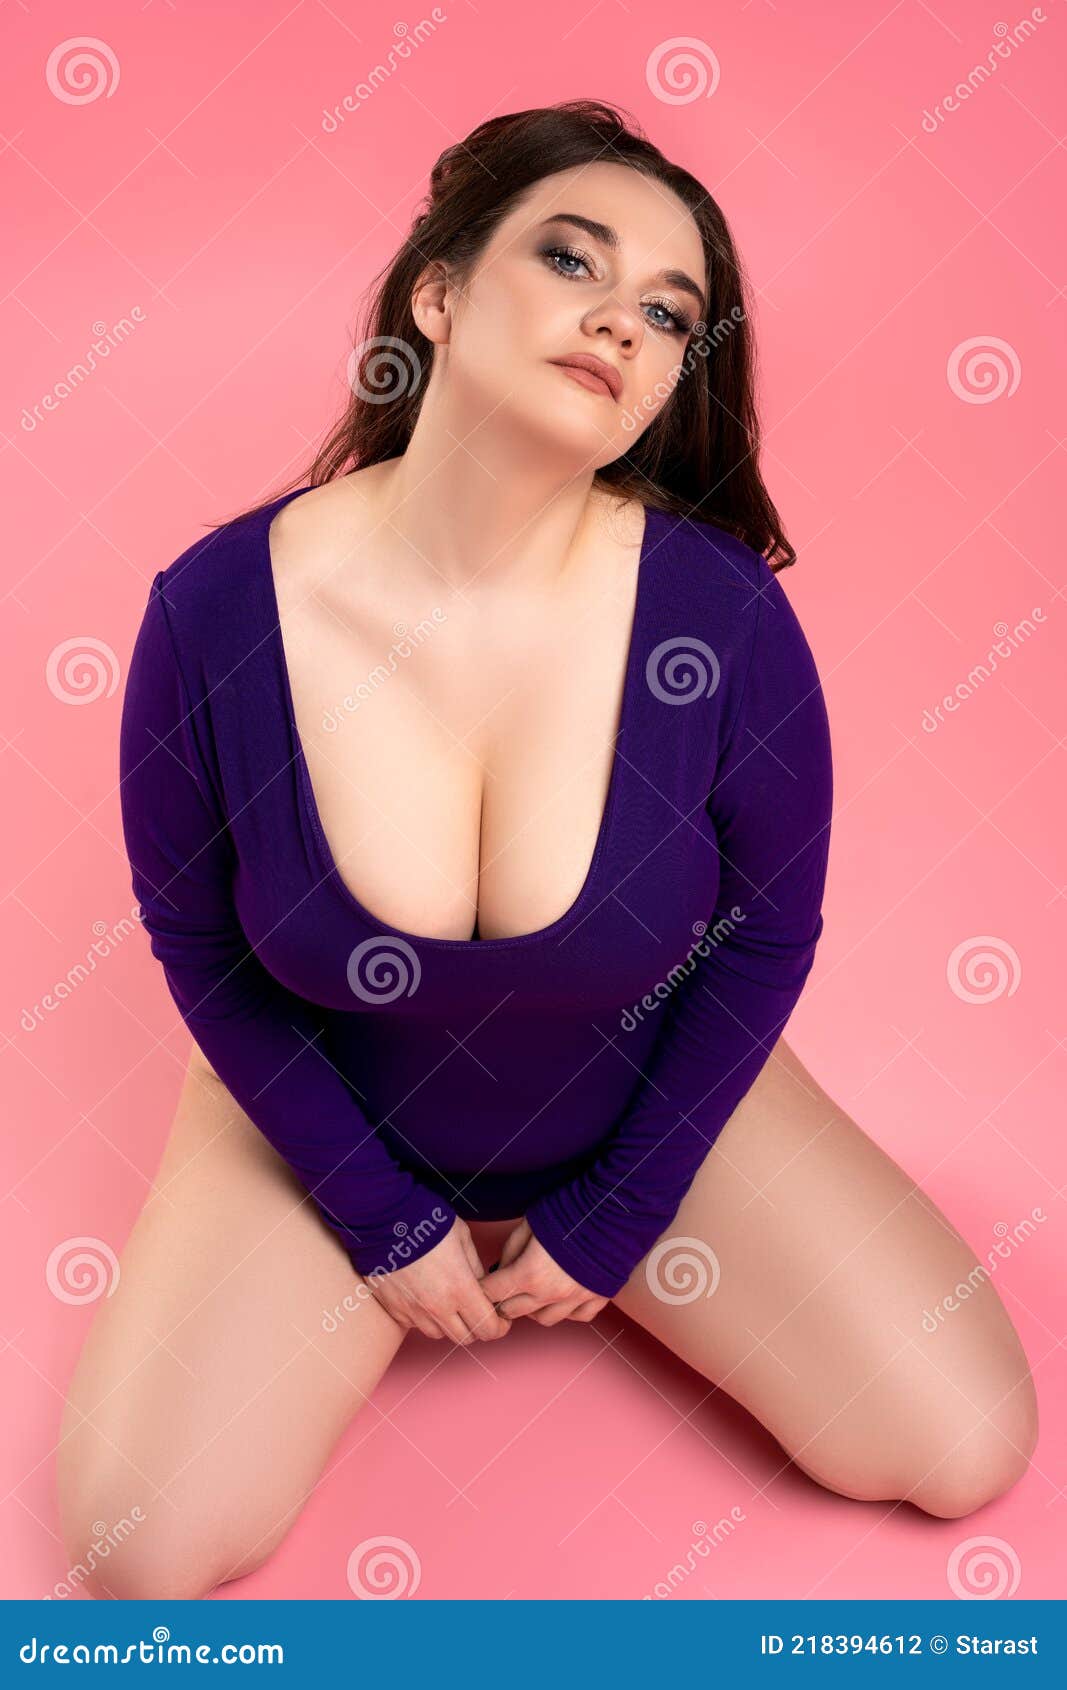 https://thumbs.dreamstime.com/z/sexy-plus-size-model-large-breasts-purple-bodysuit-pink-background-sexy-plus-size-model-large-breasts-purple-218394612.jpg